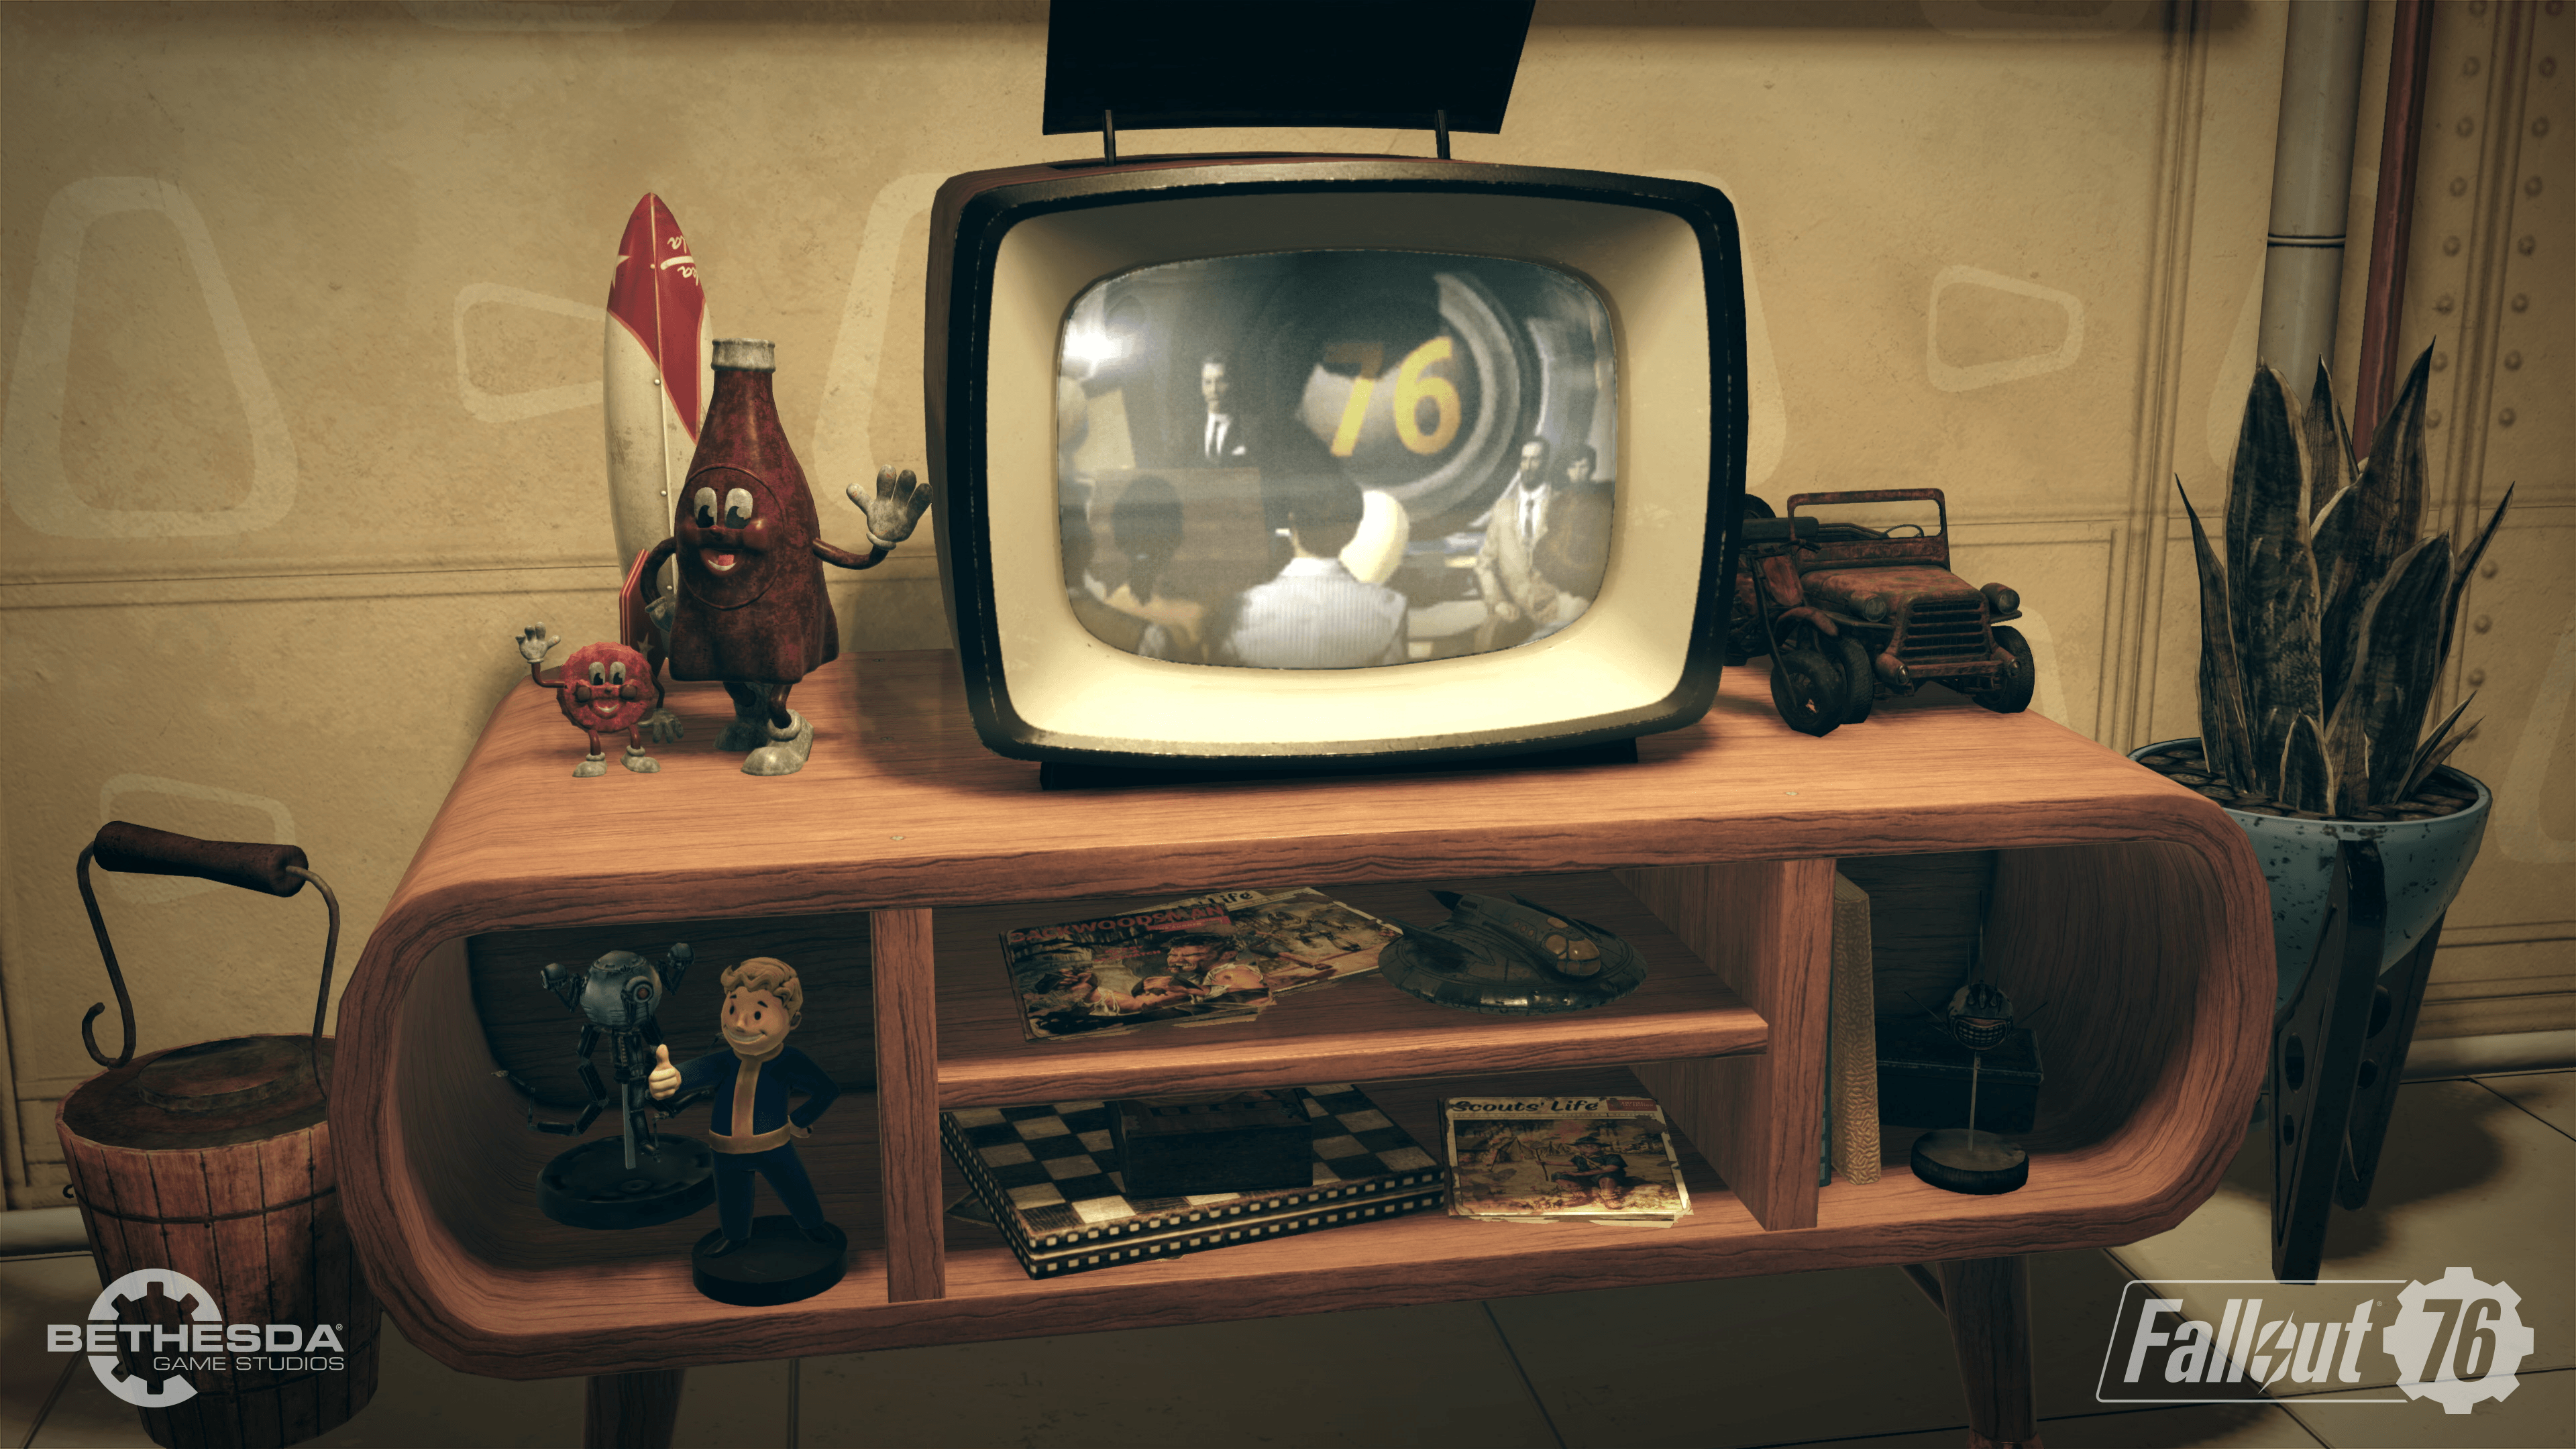 Fallout 76, Bethesda, Xbox One, 093155173040 - image 4 of 12